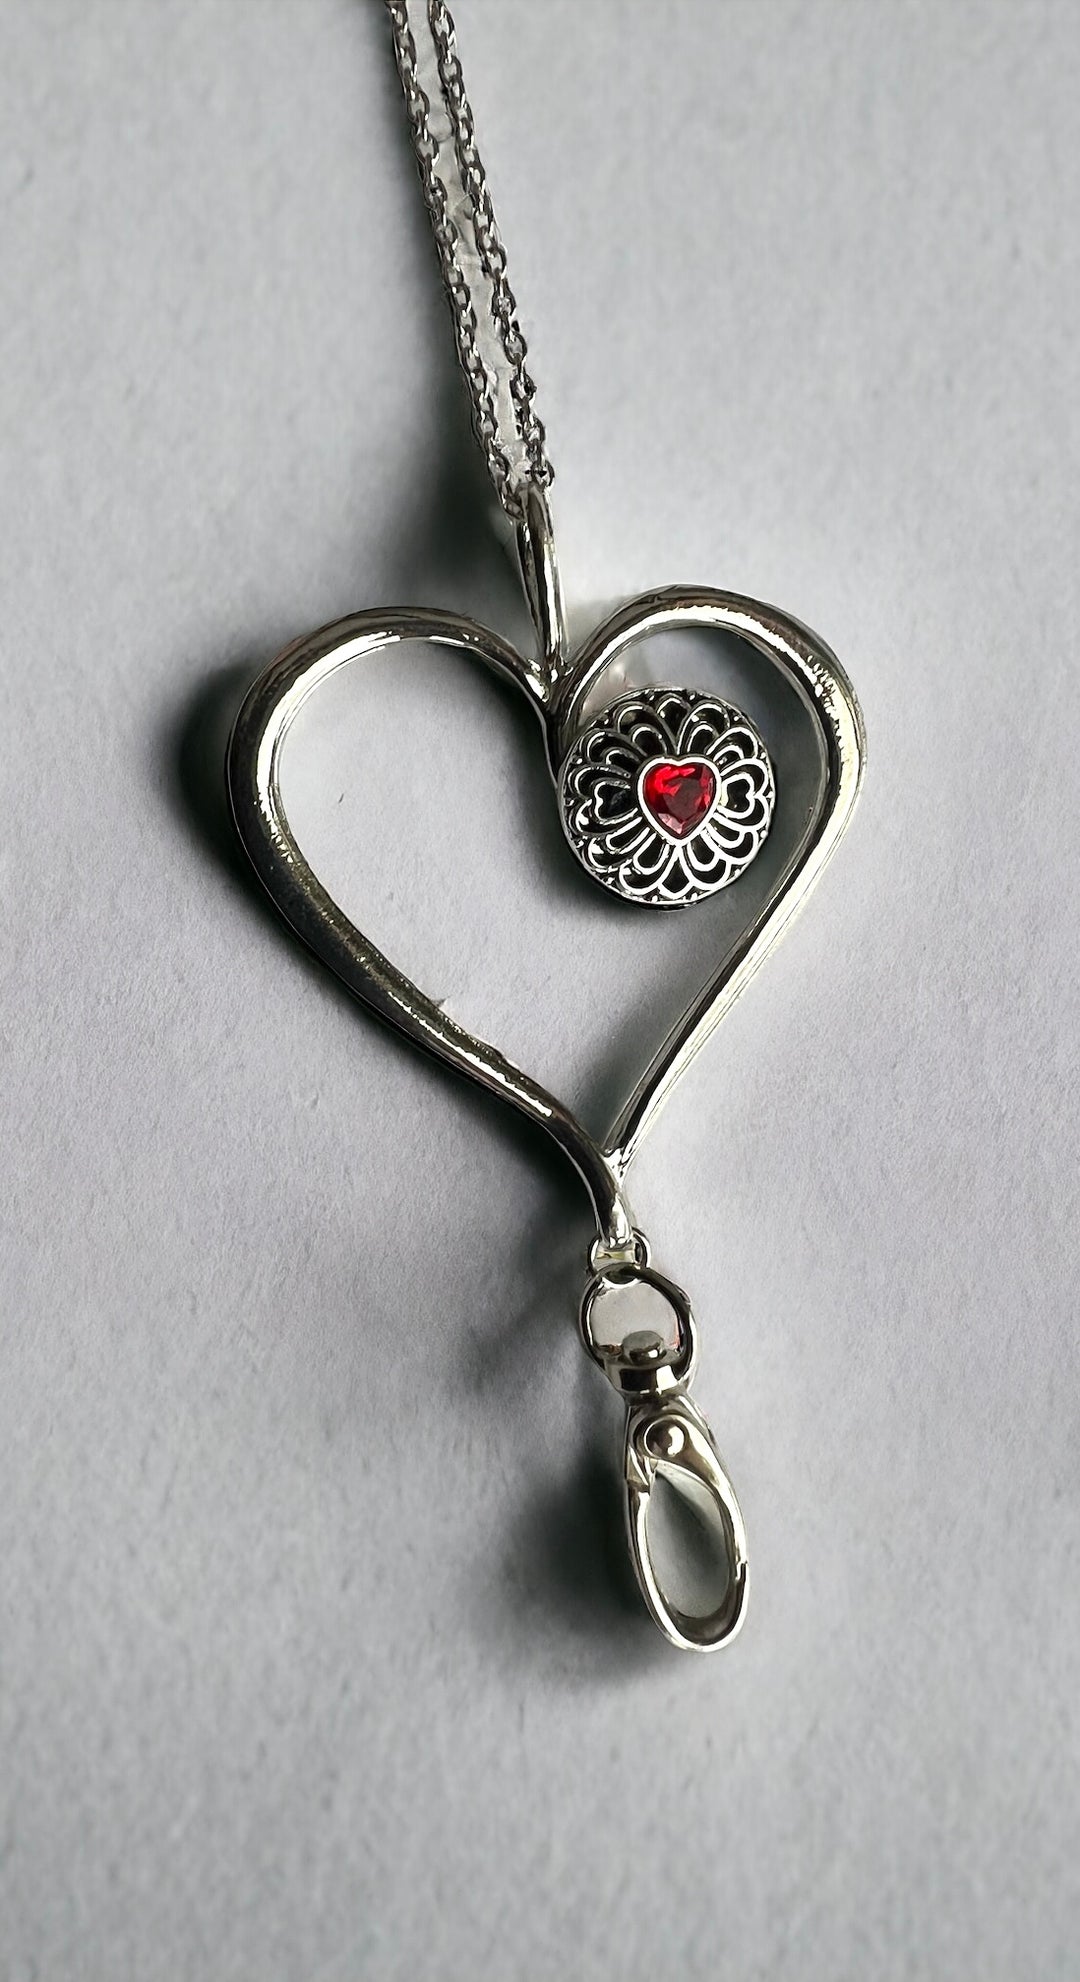 Valentine Special! Silver Heart Snap Jewelry Charm Pendant Necklace with Clip for ID Badge + Bonus Red Heart Snap